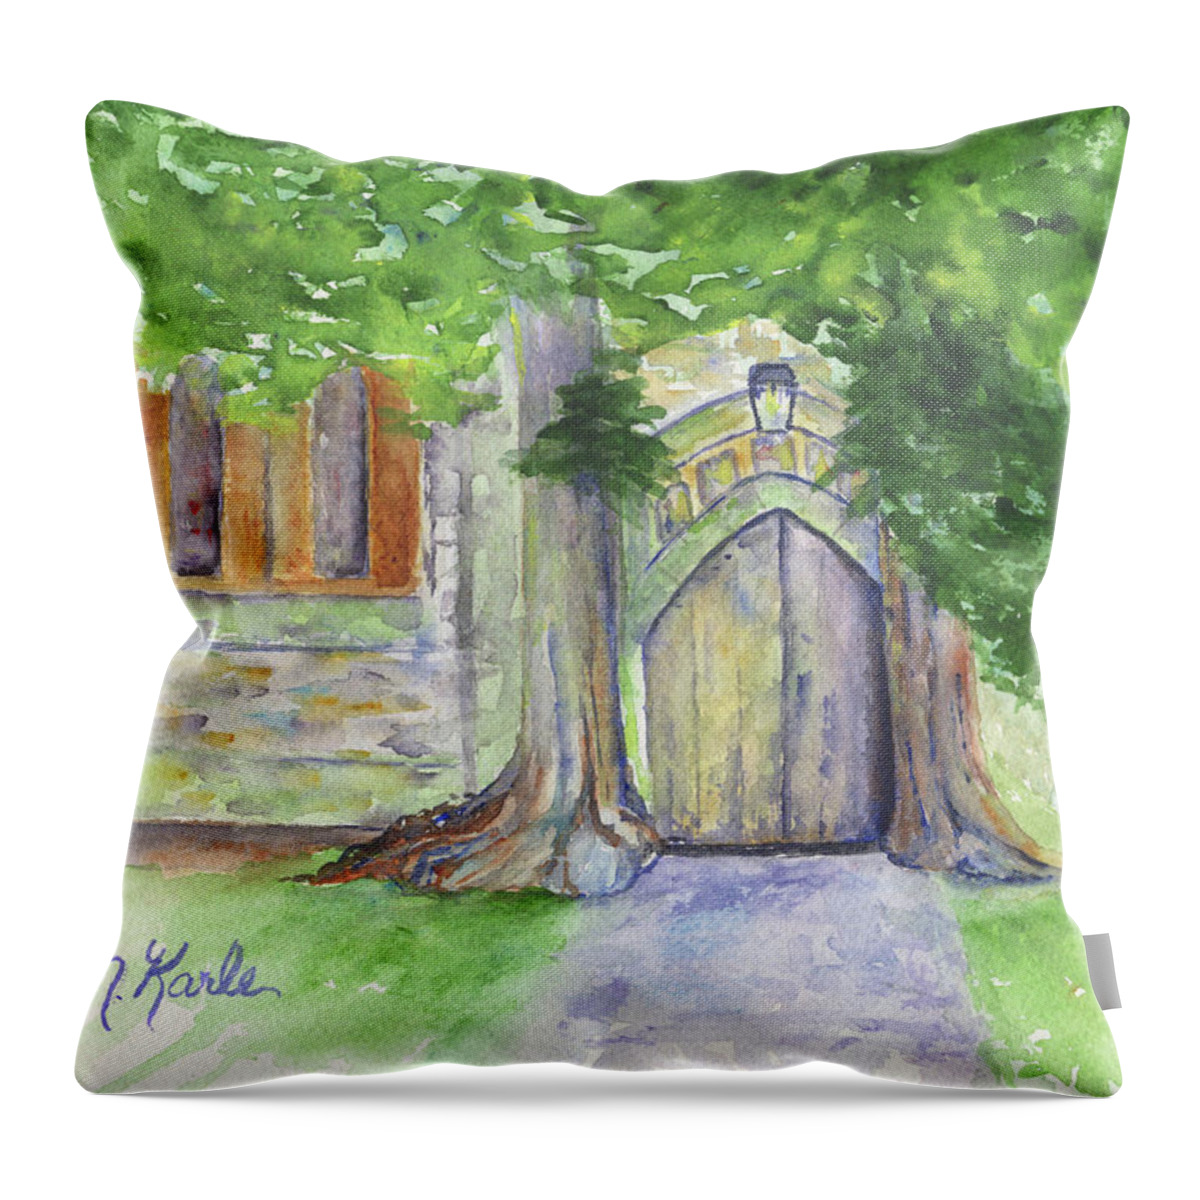 Church Throw Pillow featuring the painting Church Trees by Marsha Karle